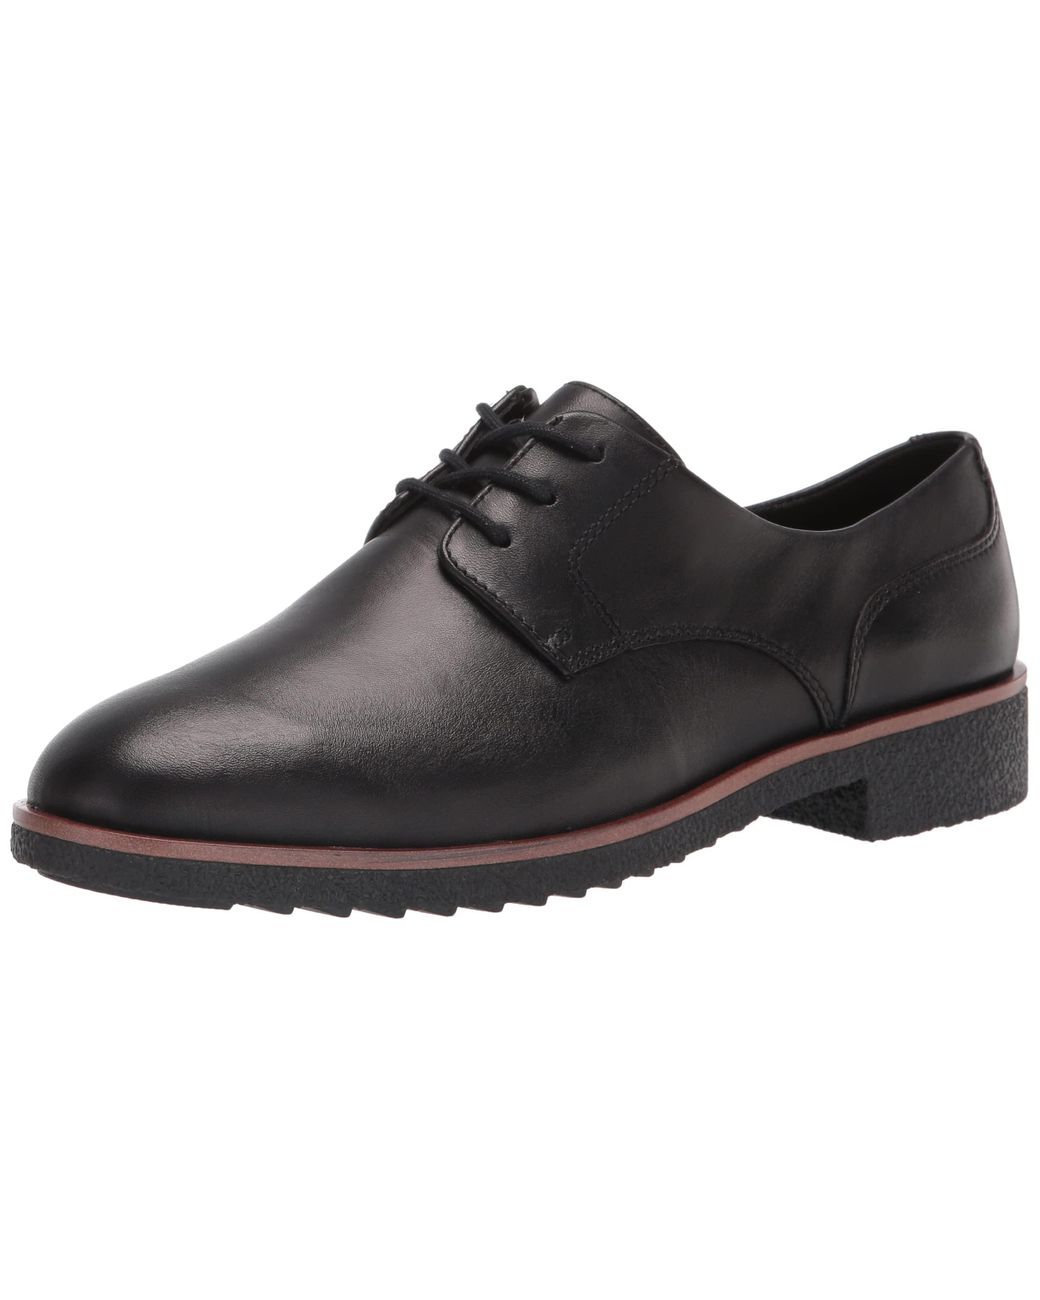 Clarks Griffin Lane Leather Derby Shoes in Black Leather (Black) - Save 55%  | Lyst